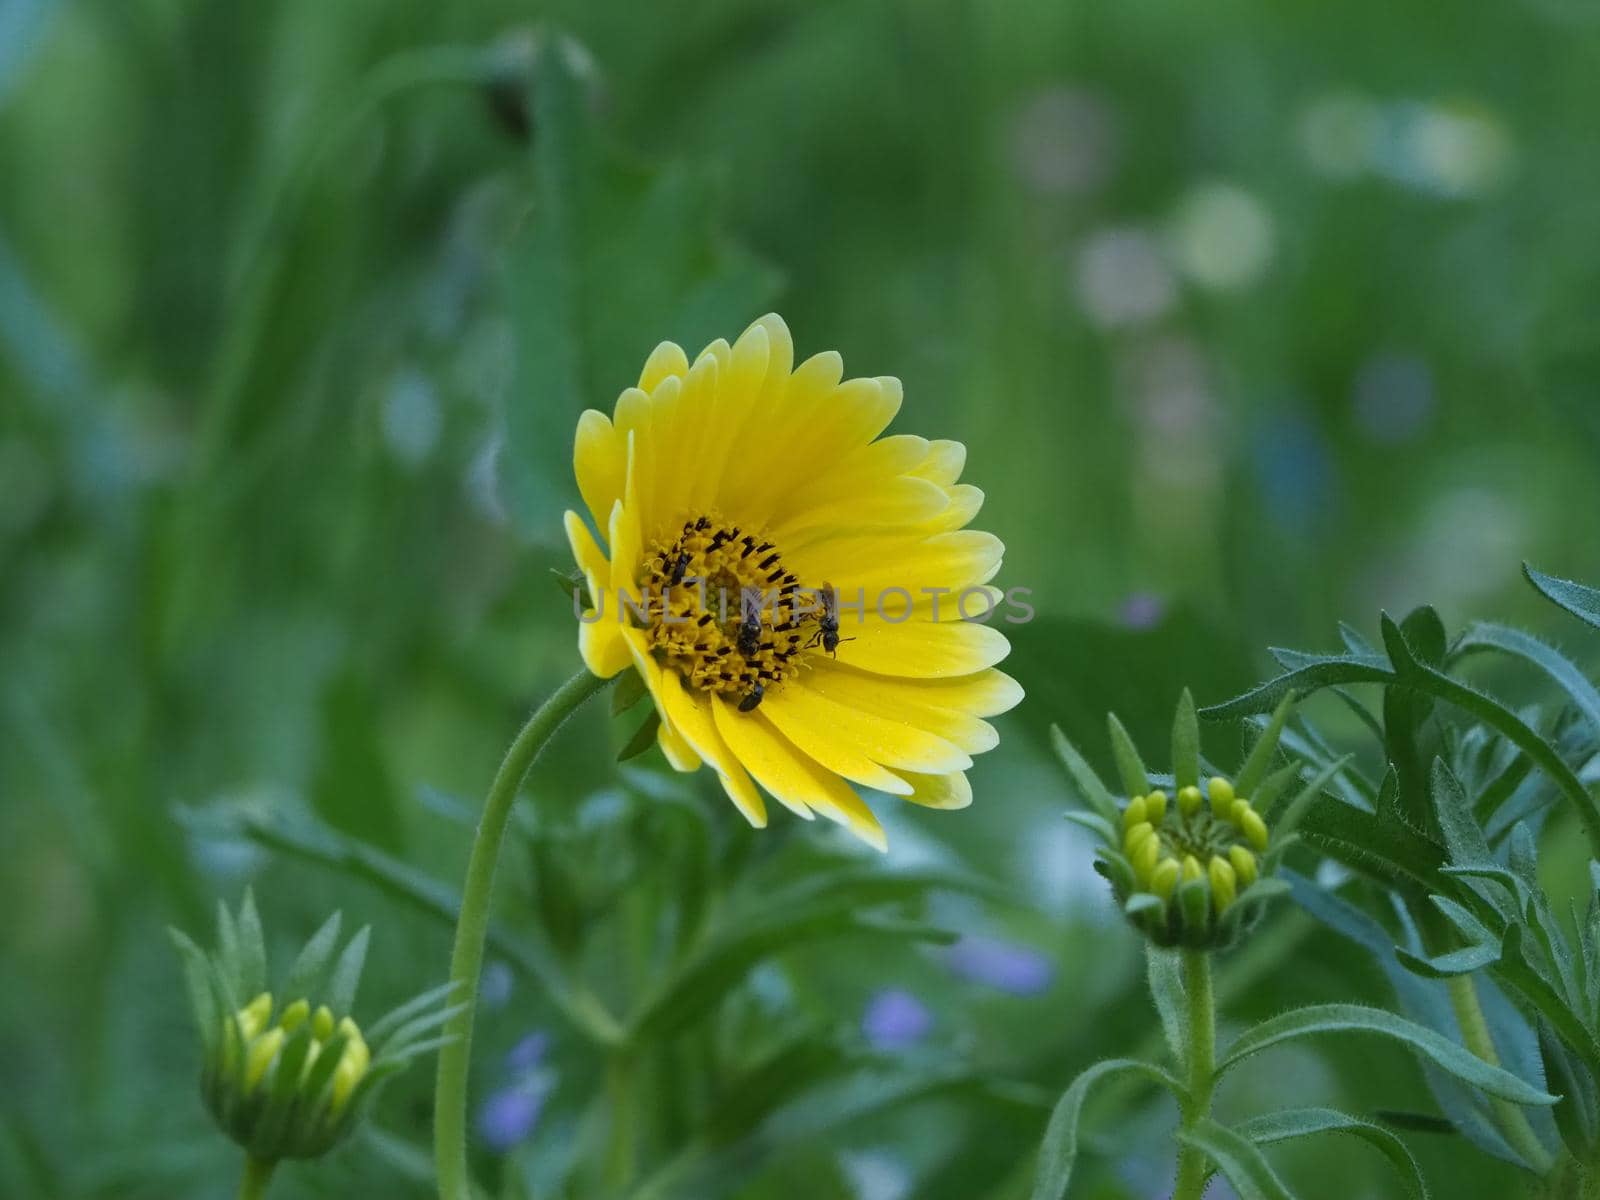 insects fetching nectar from a yellow flower in a lawn